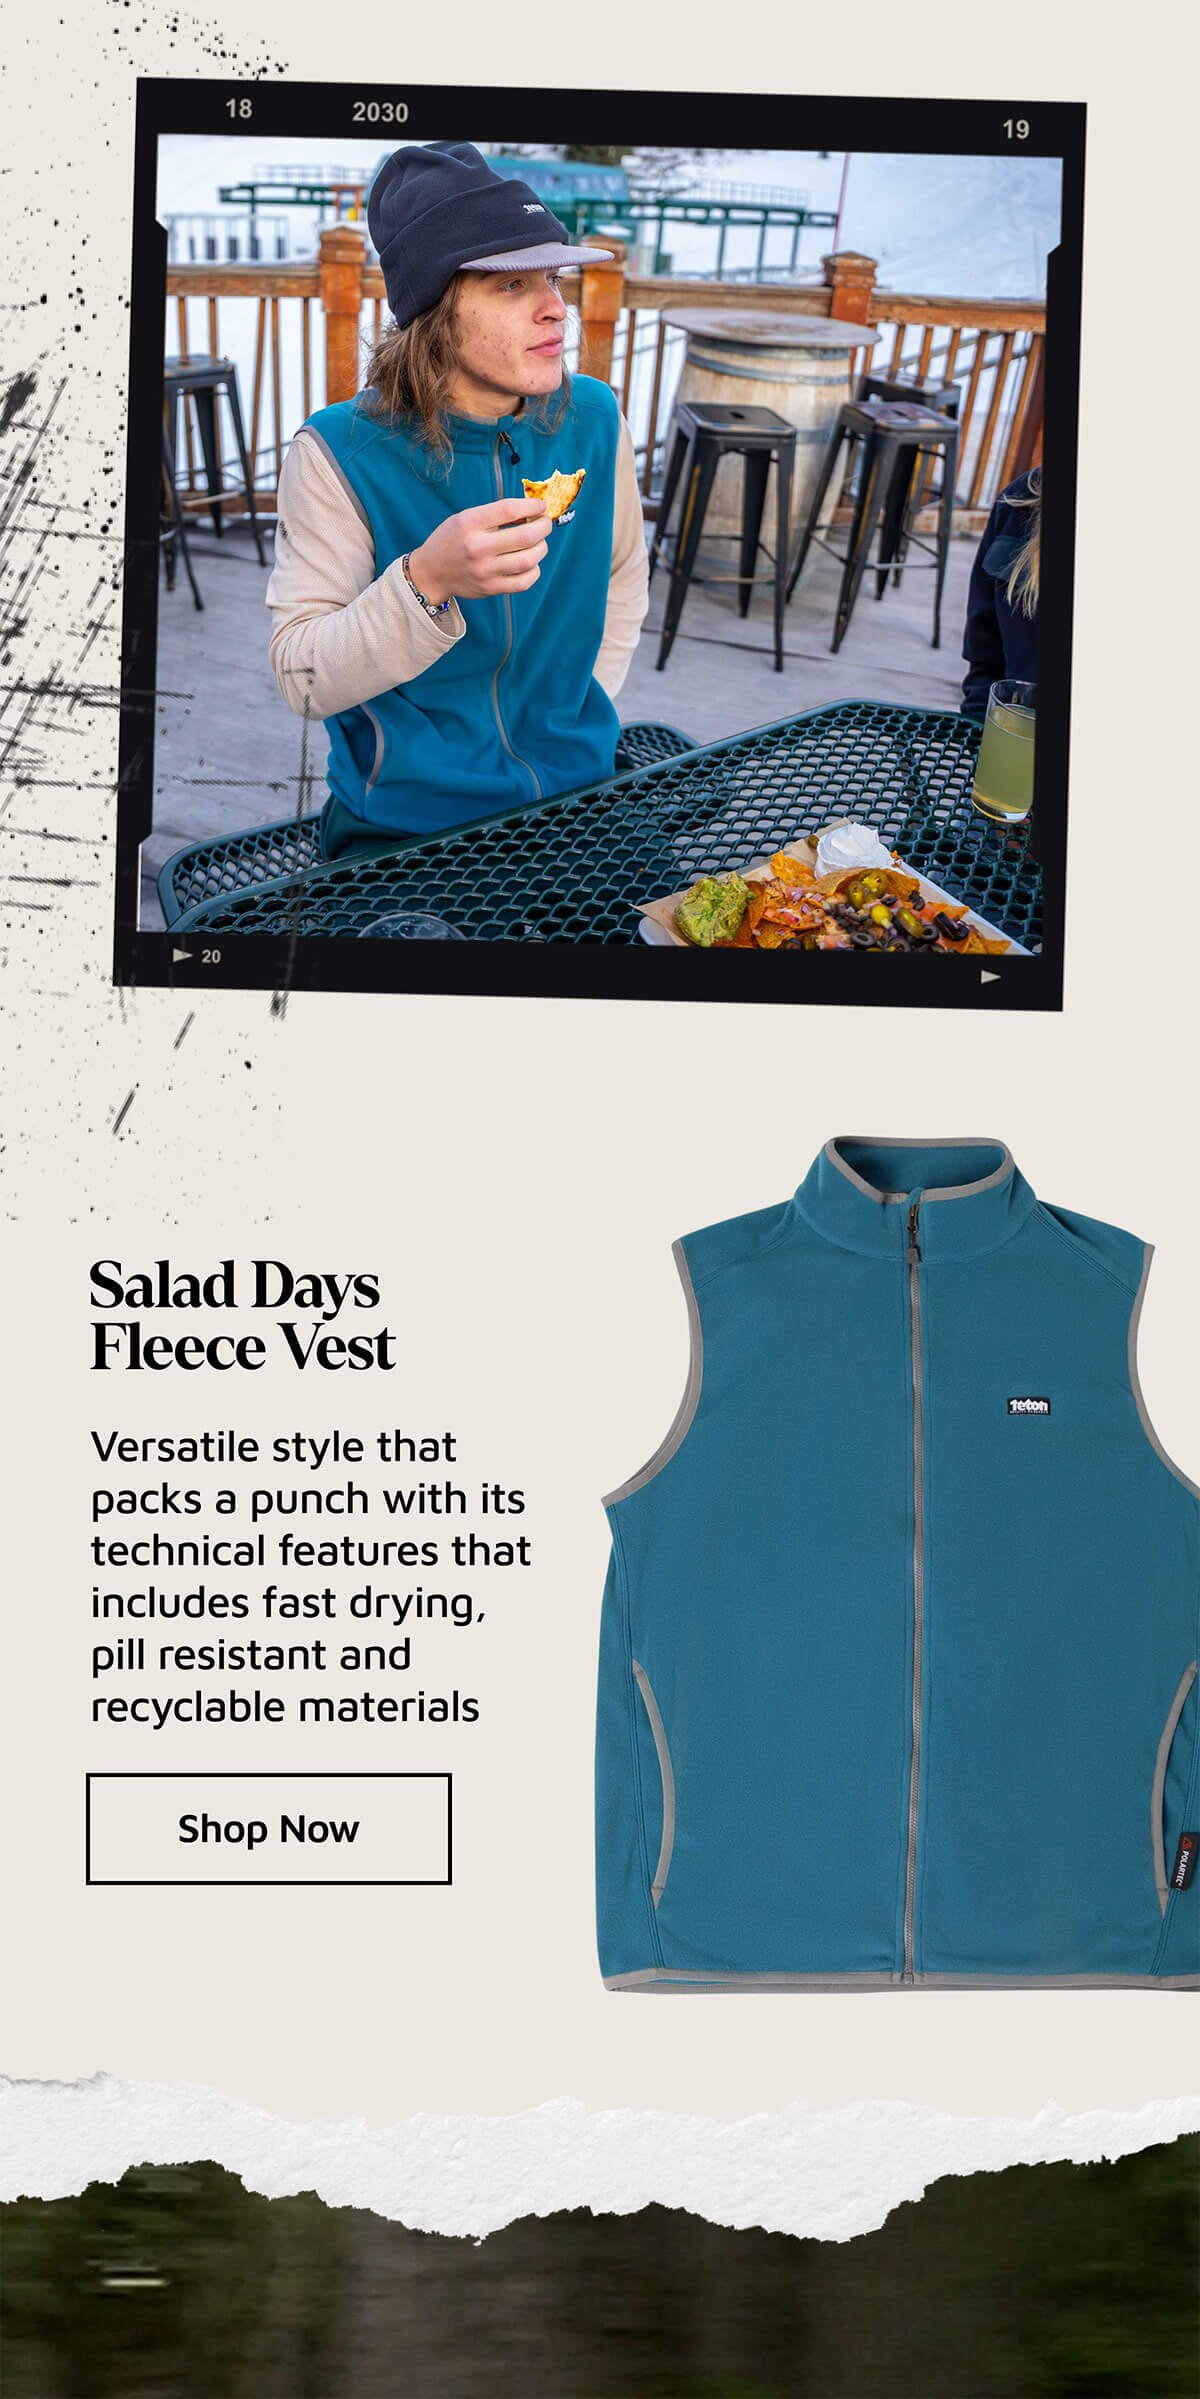 Salad Days Fleece Shirt. Versatile style that packs a punch with its technical features that includes fast drying, pill resistant and recyclable materials